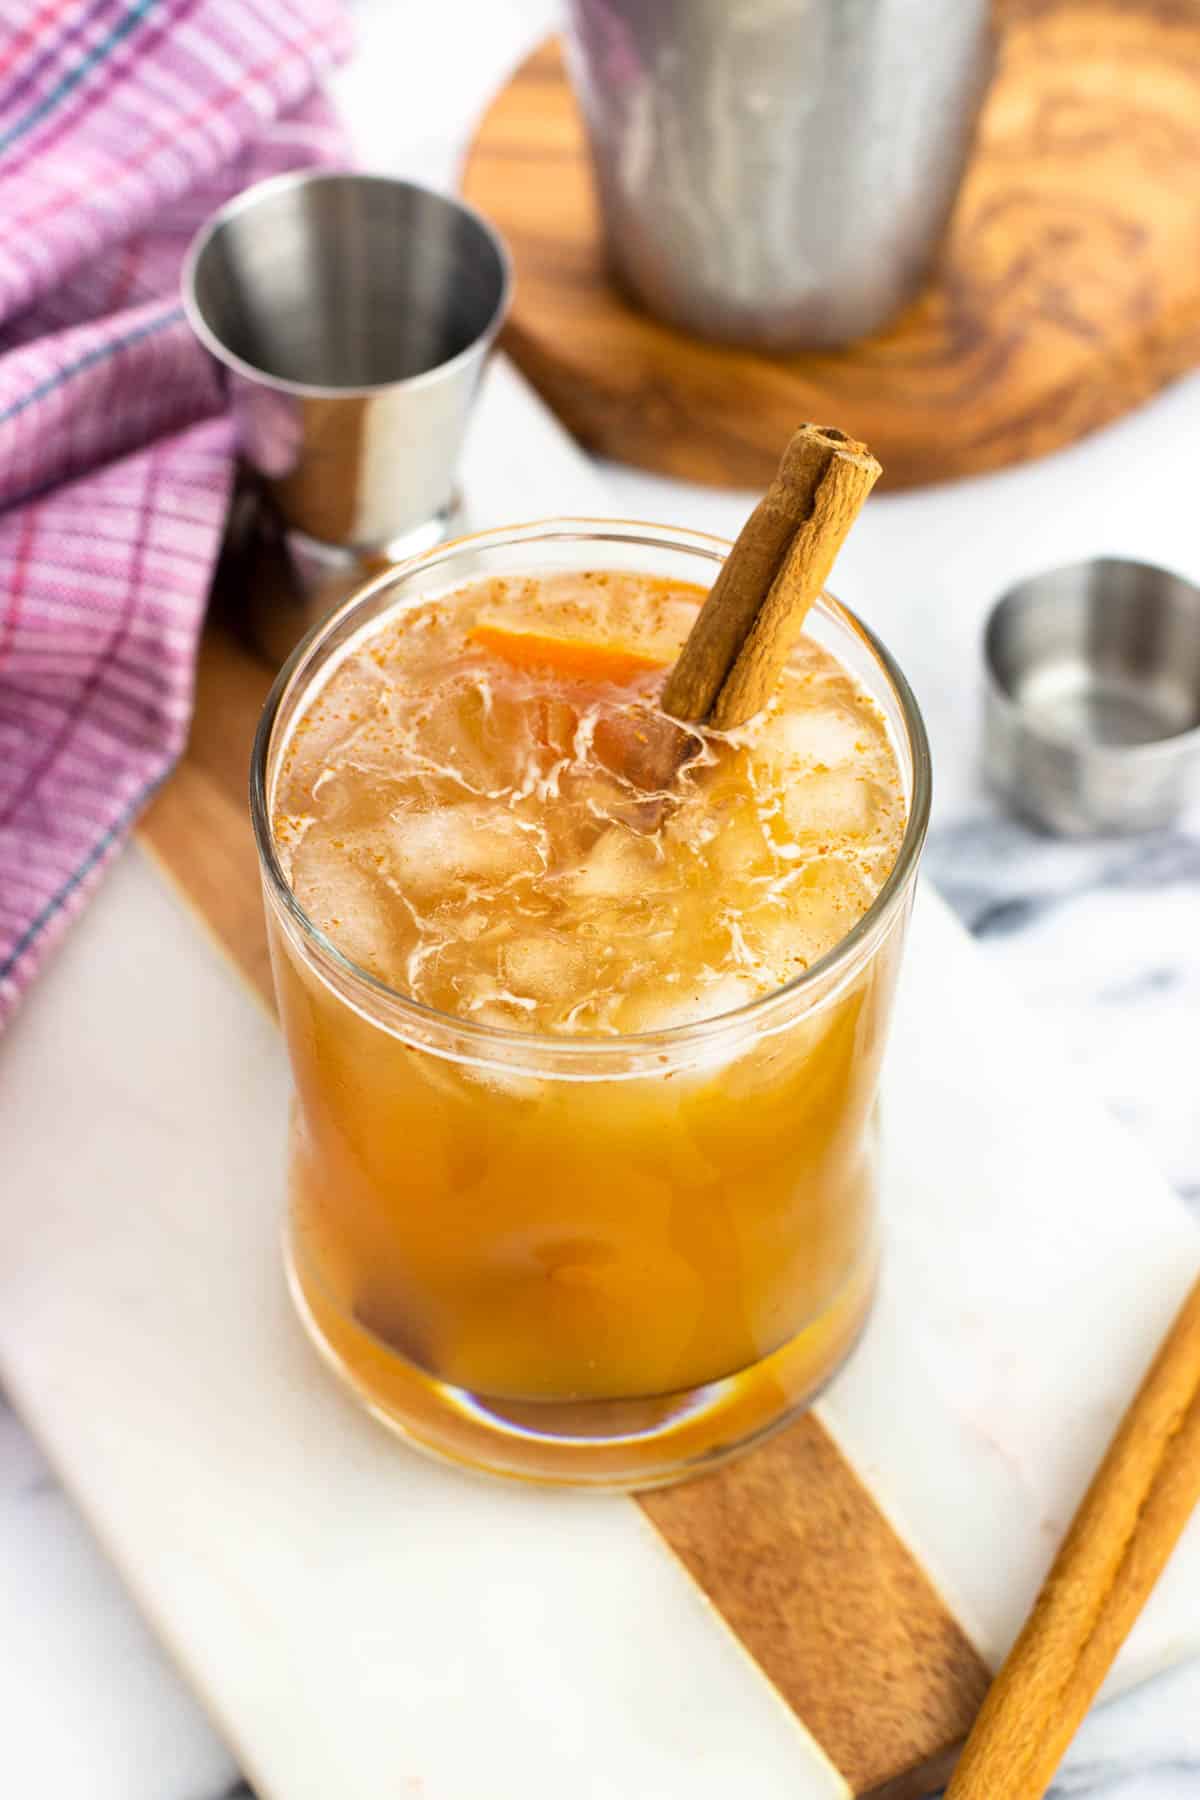 A bourbon apple cider cocktail garnished with orange peel and a cinnamon stick.